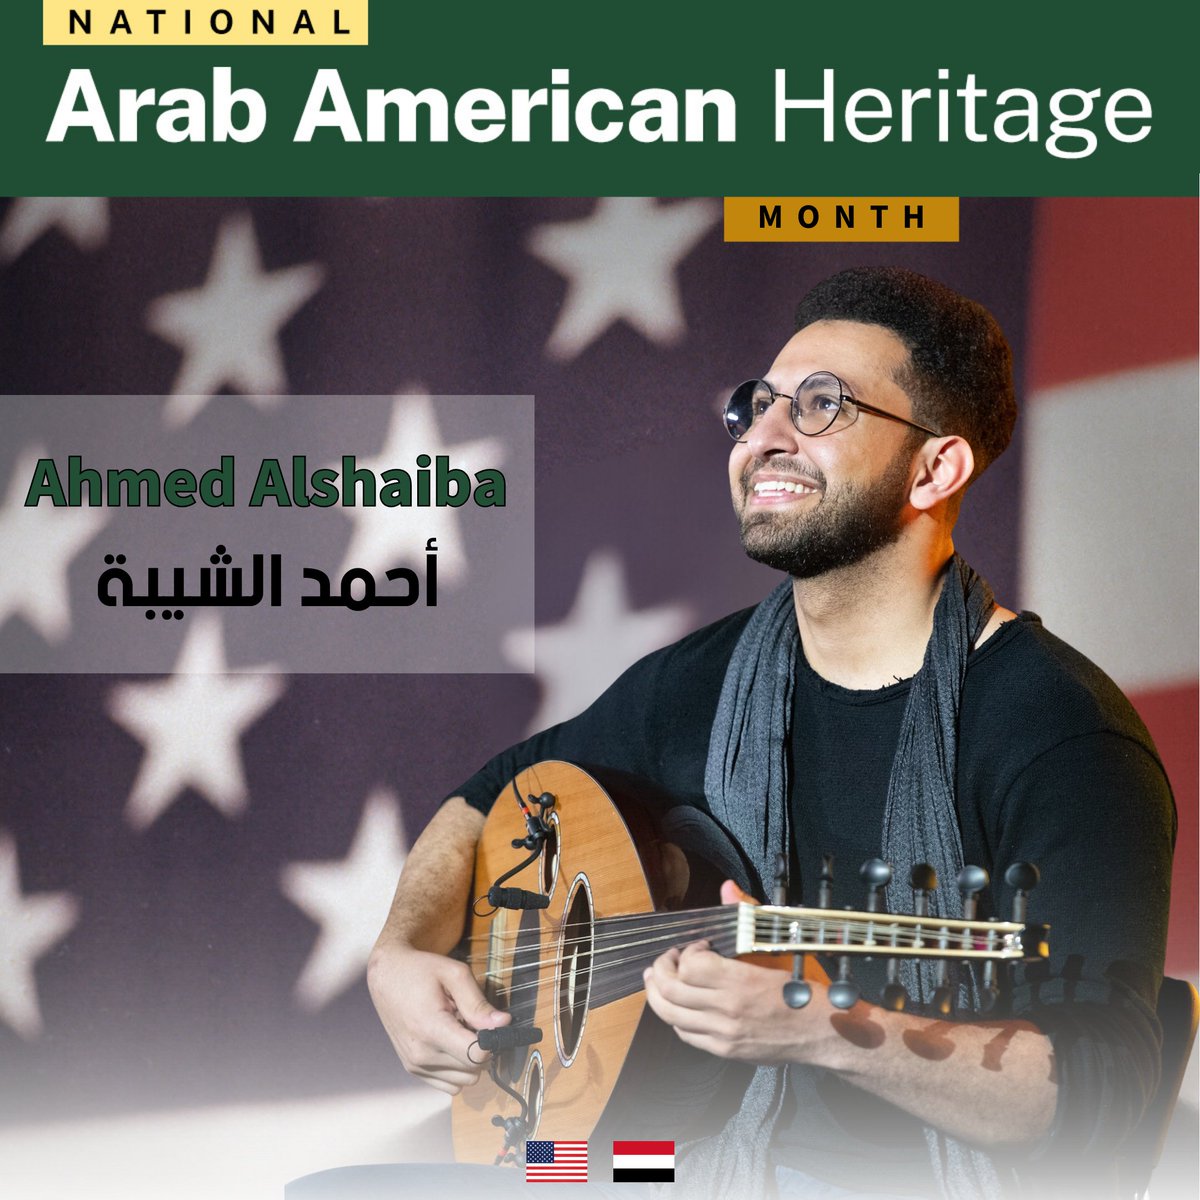 This #ArabAmericanHeritageMonth, we honor the legacy of Ahmed Alshaiba, a self-taught Yemeni American musician who captivated audiences with his mastery of traditional and contemporary instruments. From New York City to global stages, his talent knew no bounds 🎶🌍.…